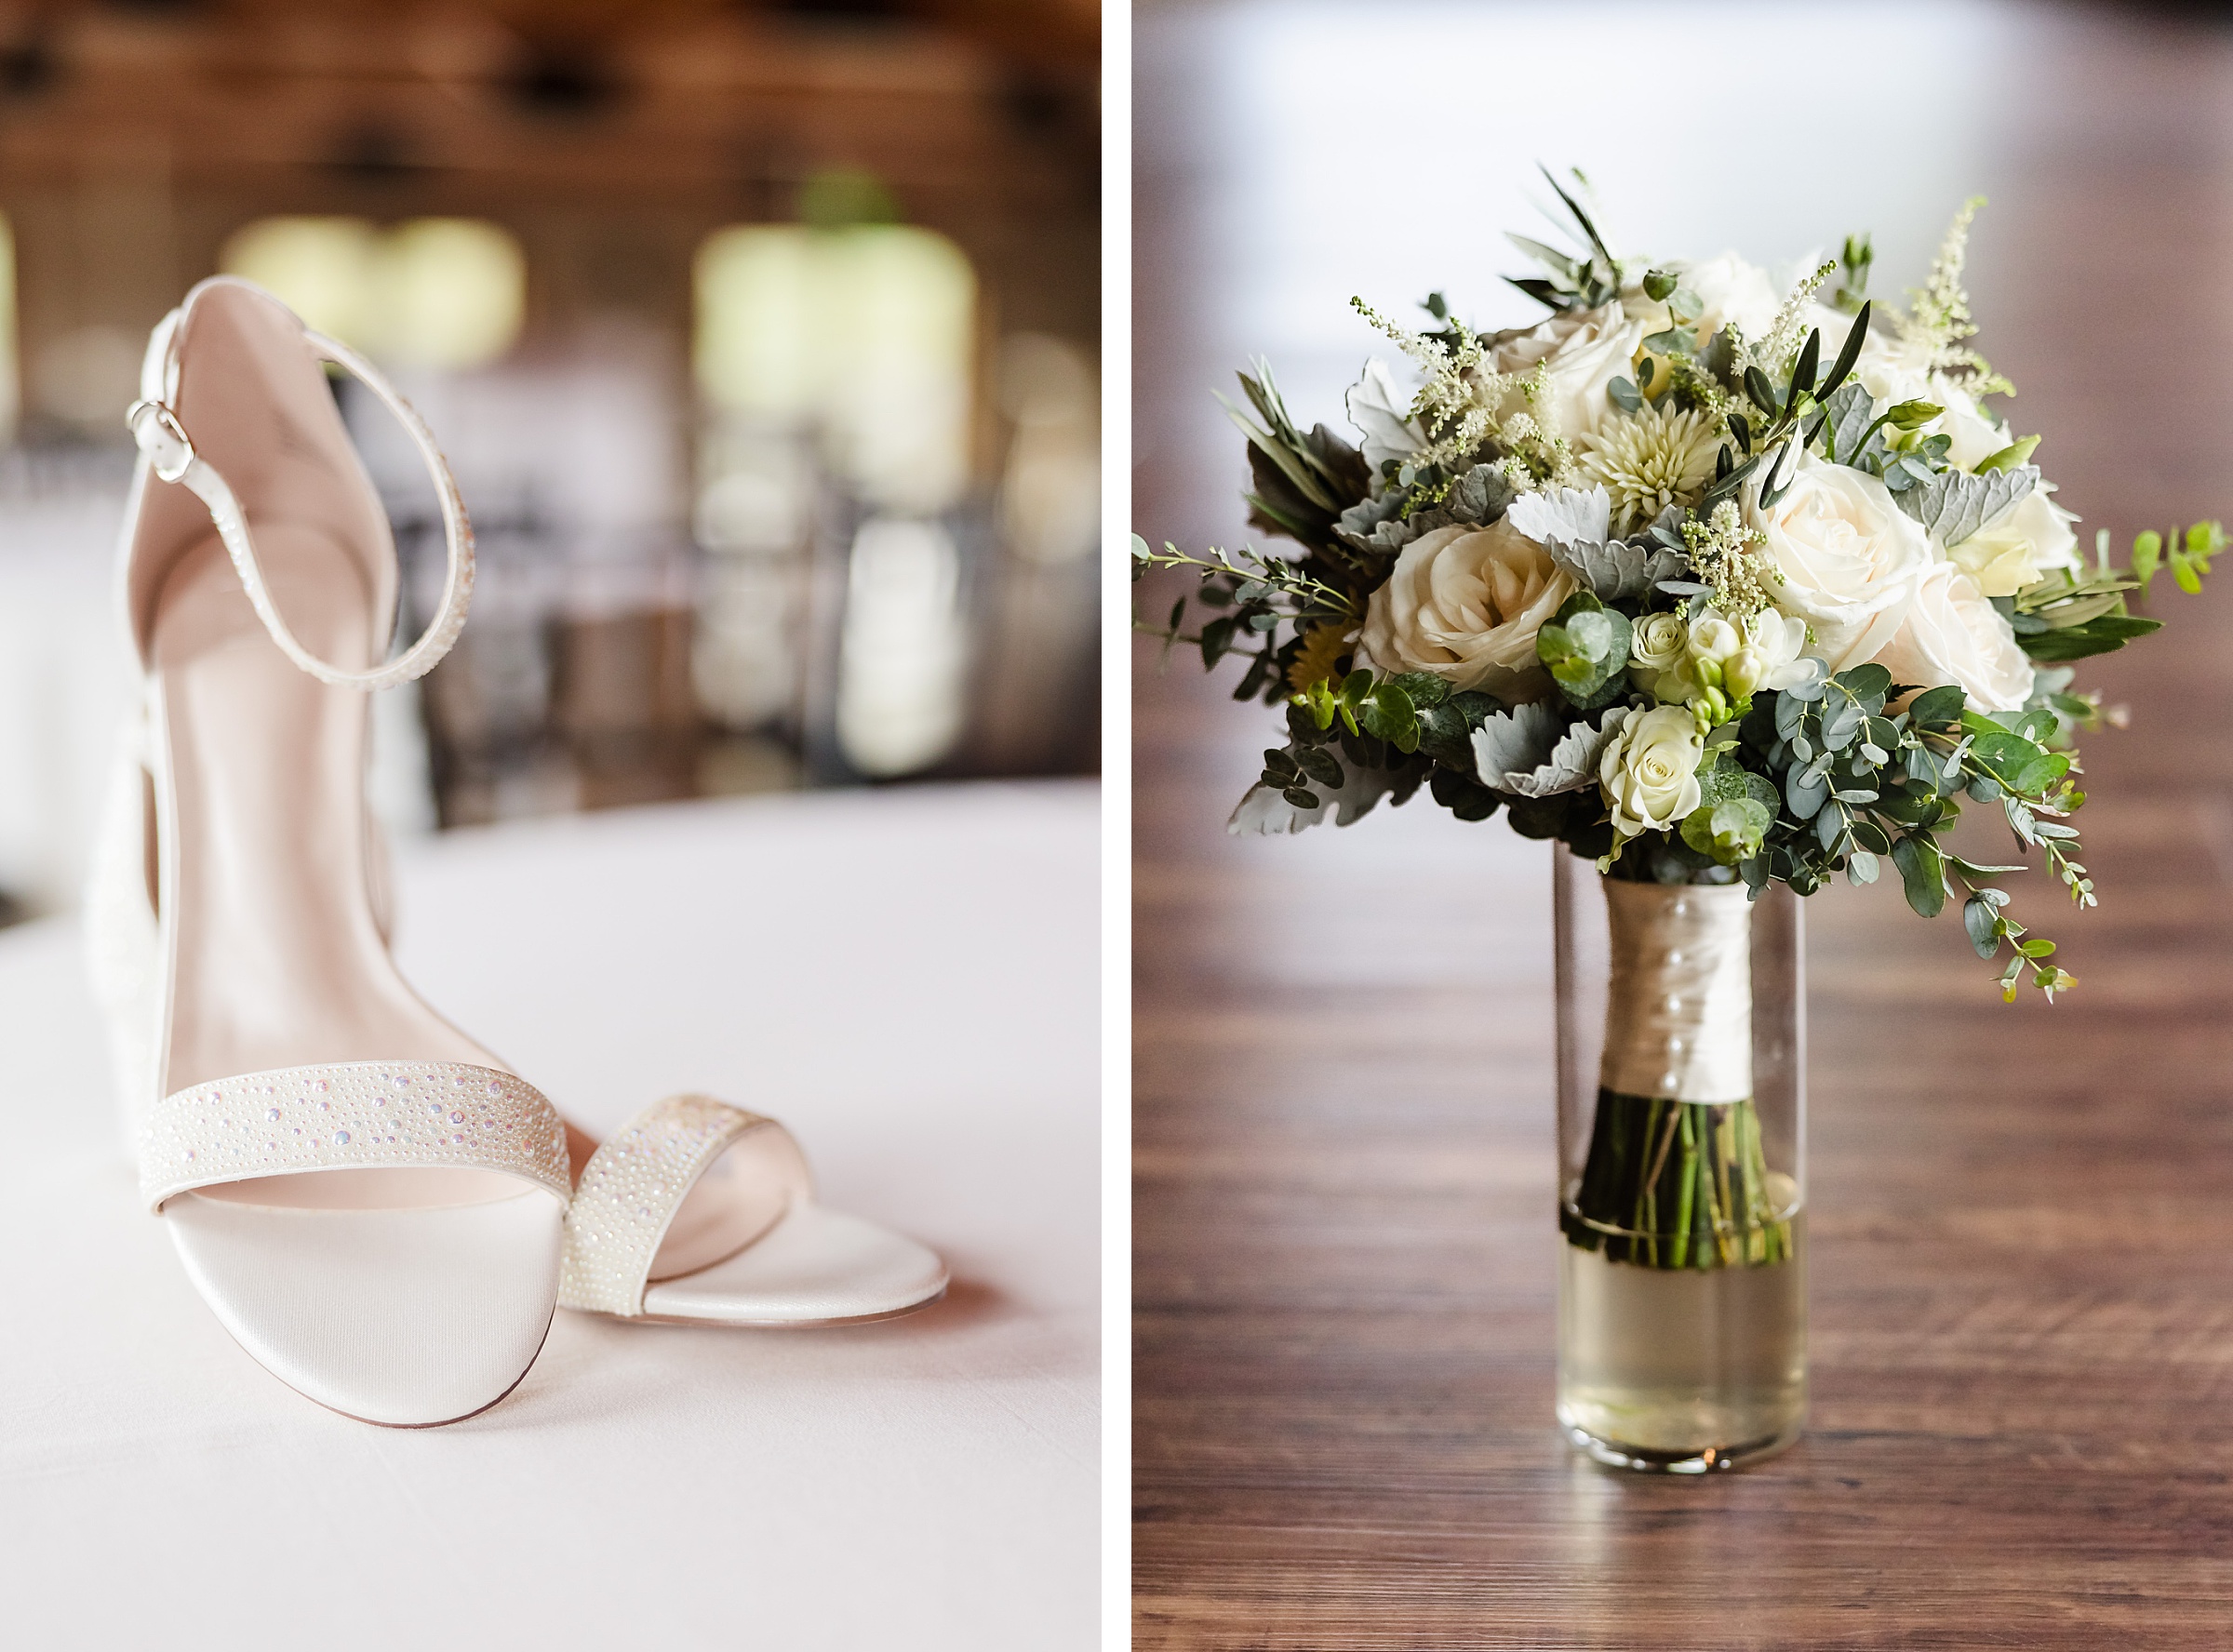 Bride's shoes and bouquet at her wedding at the Fisherman's Inn in Elburn, Illinois.